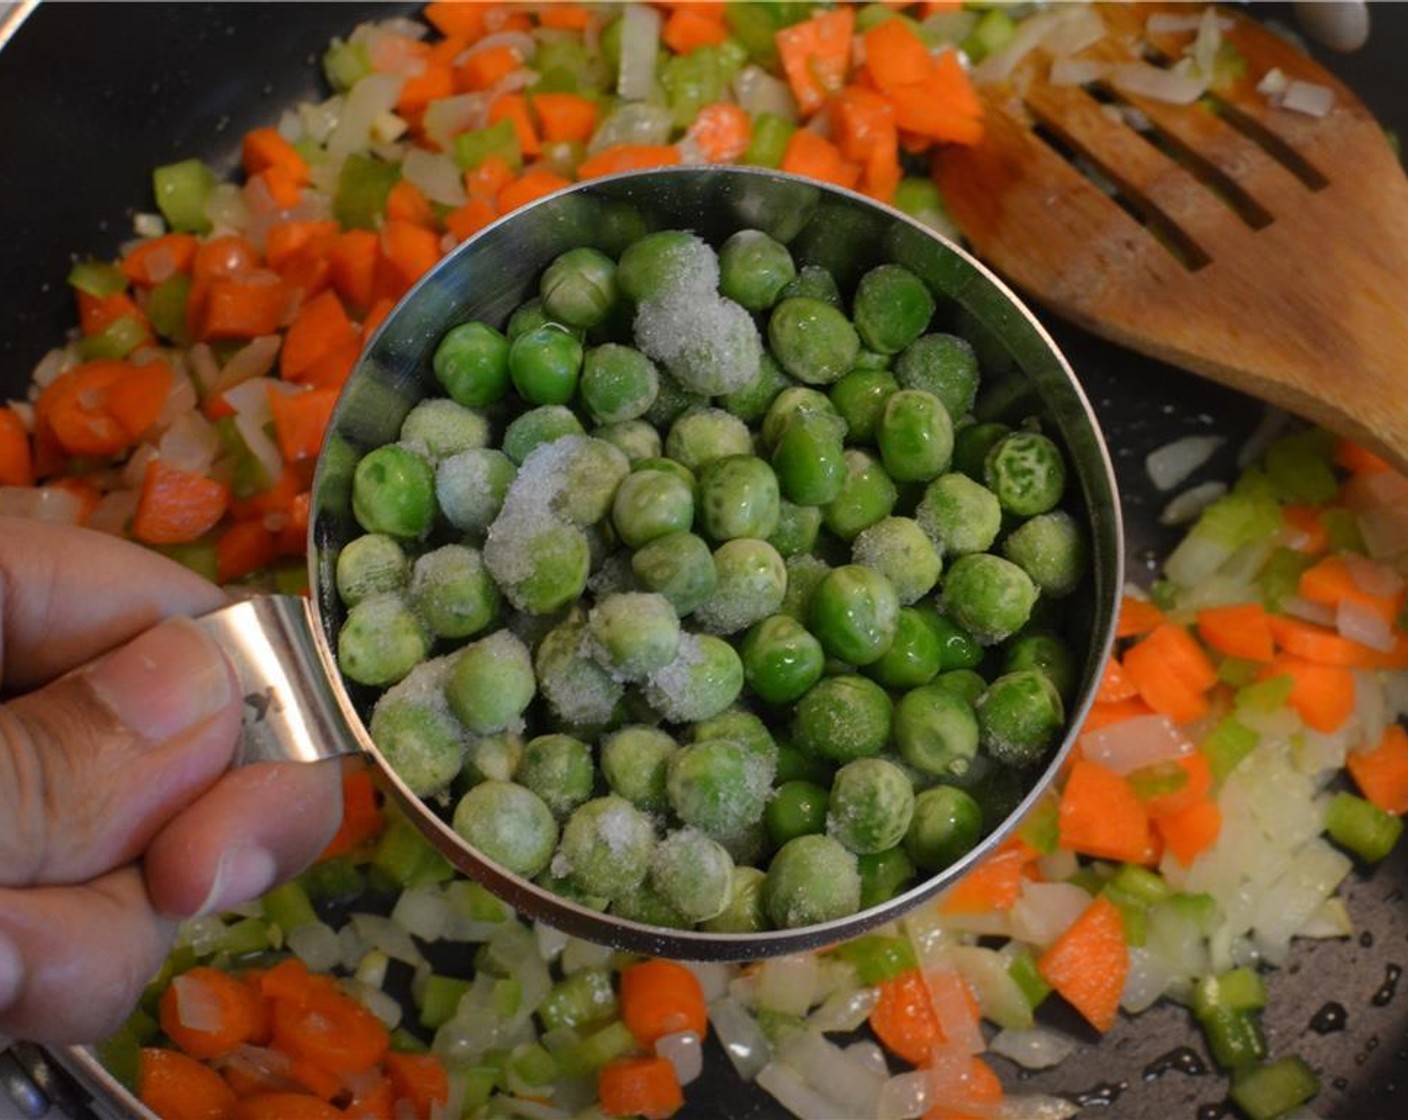 step 4 Add the finely diced Carrots (2), finely diced Celery (2 stalks) and Frozen Green Peas (3/4 cup) to the pan and mix together.